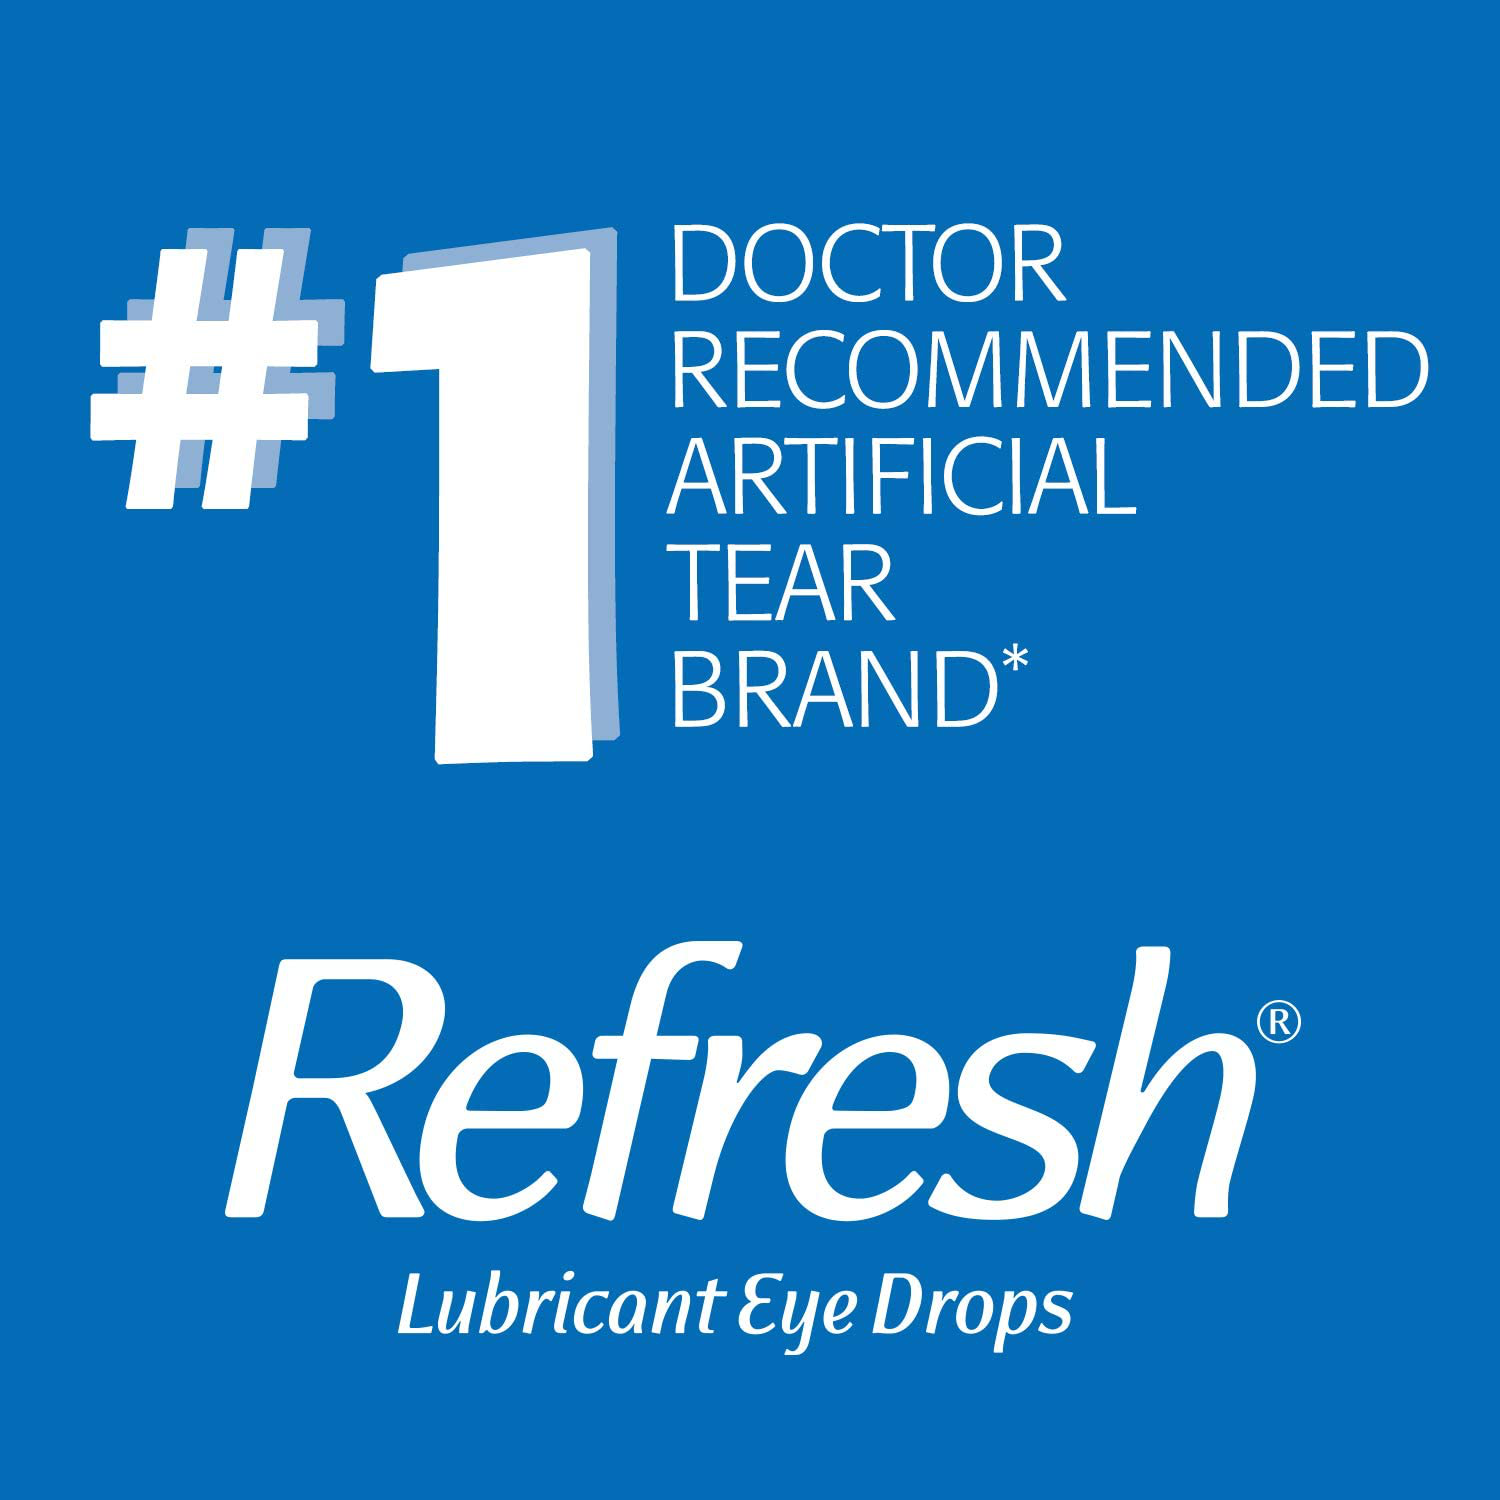 Refresh Optive Lubricant Eye Drops, Preservative-Free, 0.01 Fl Oz Single-Use Containers, 30 Count